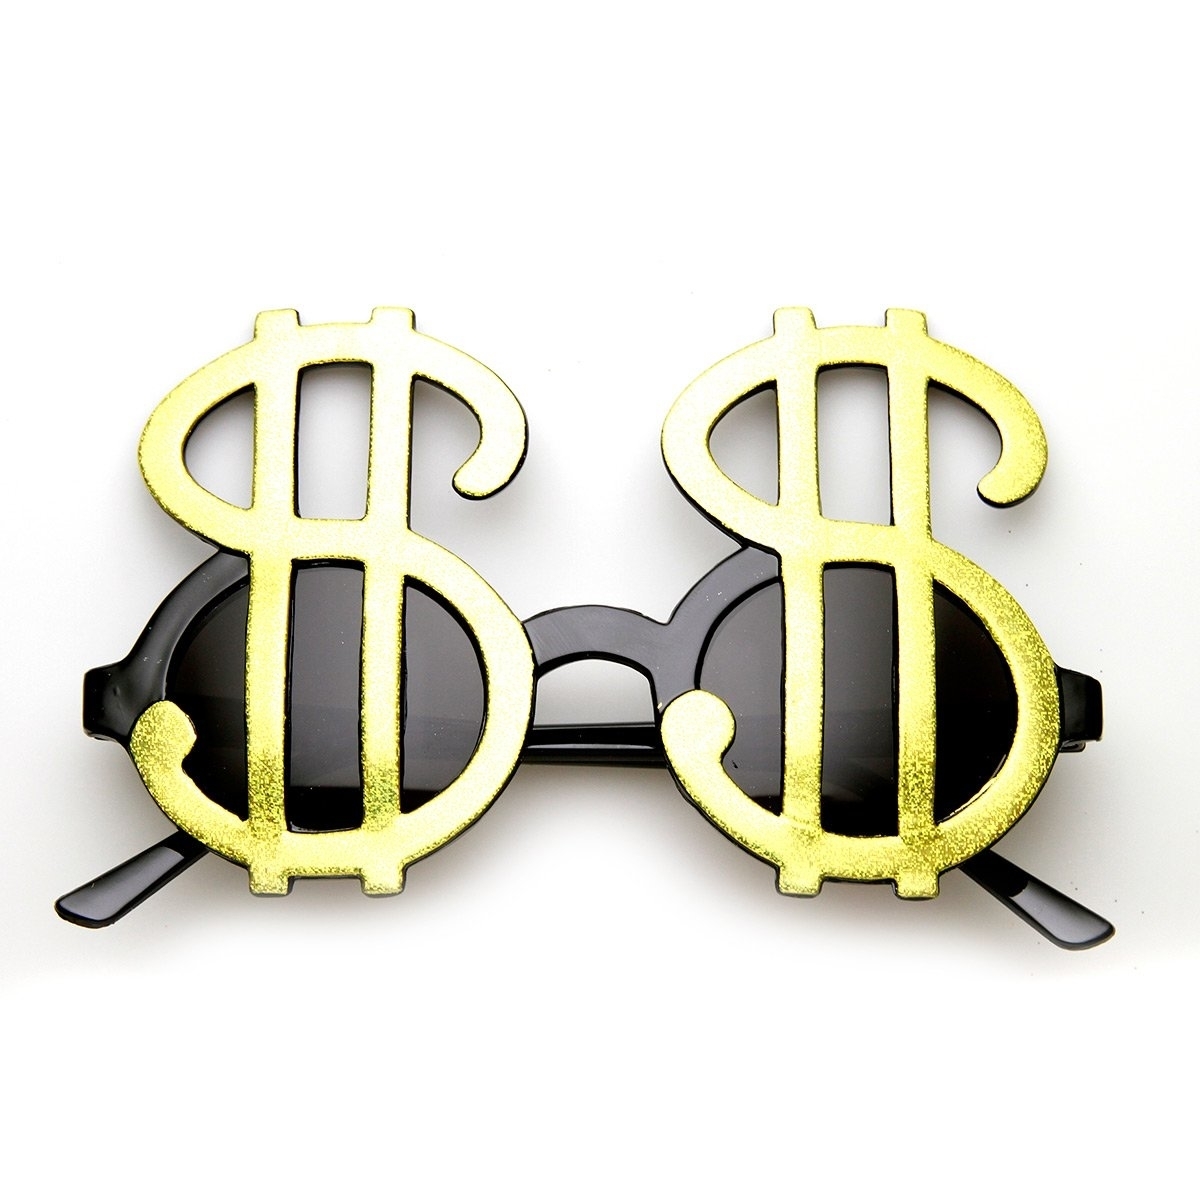 Money Dollar Signs Bling Fun Party Pimp Costume Novelty Glasses - Silver Smoke